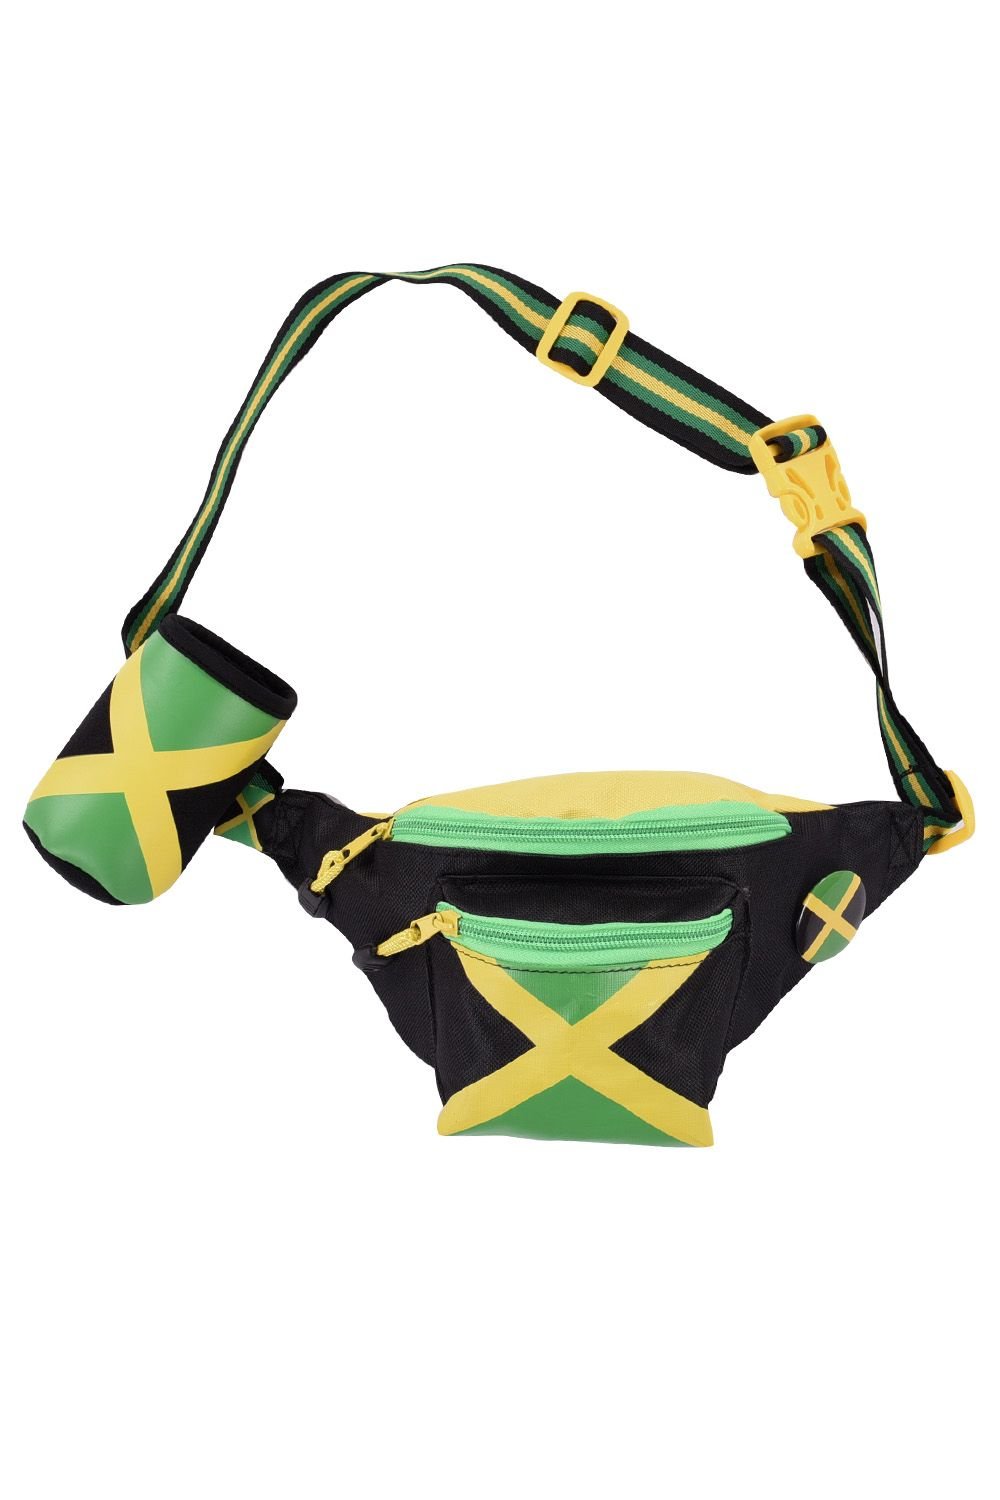 Image of Jamaica Fanny Pack with Drink Holder